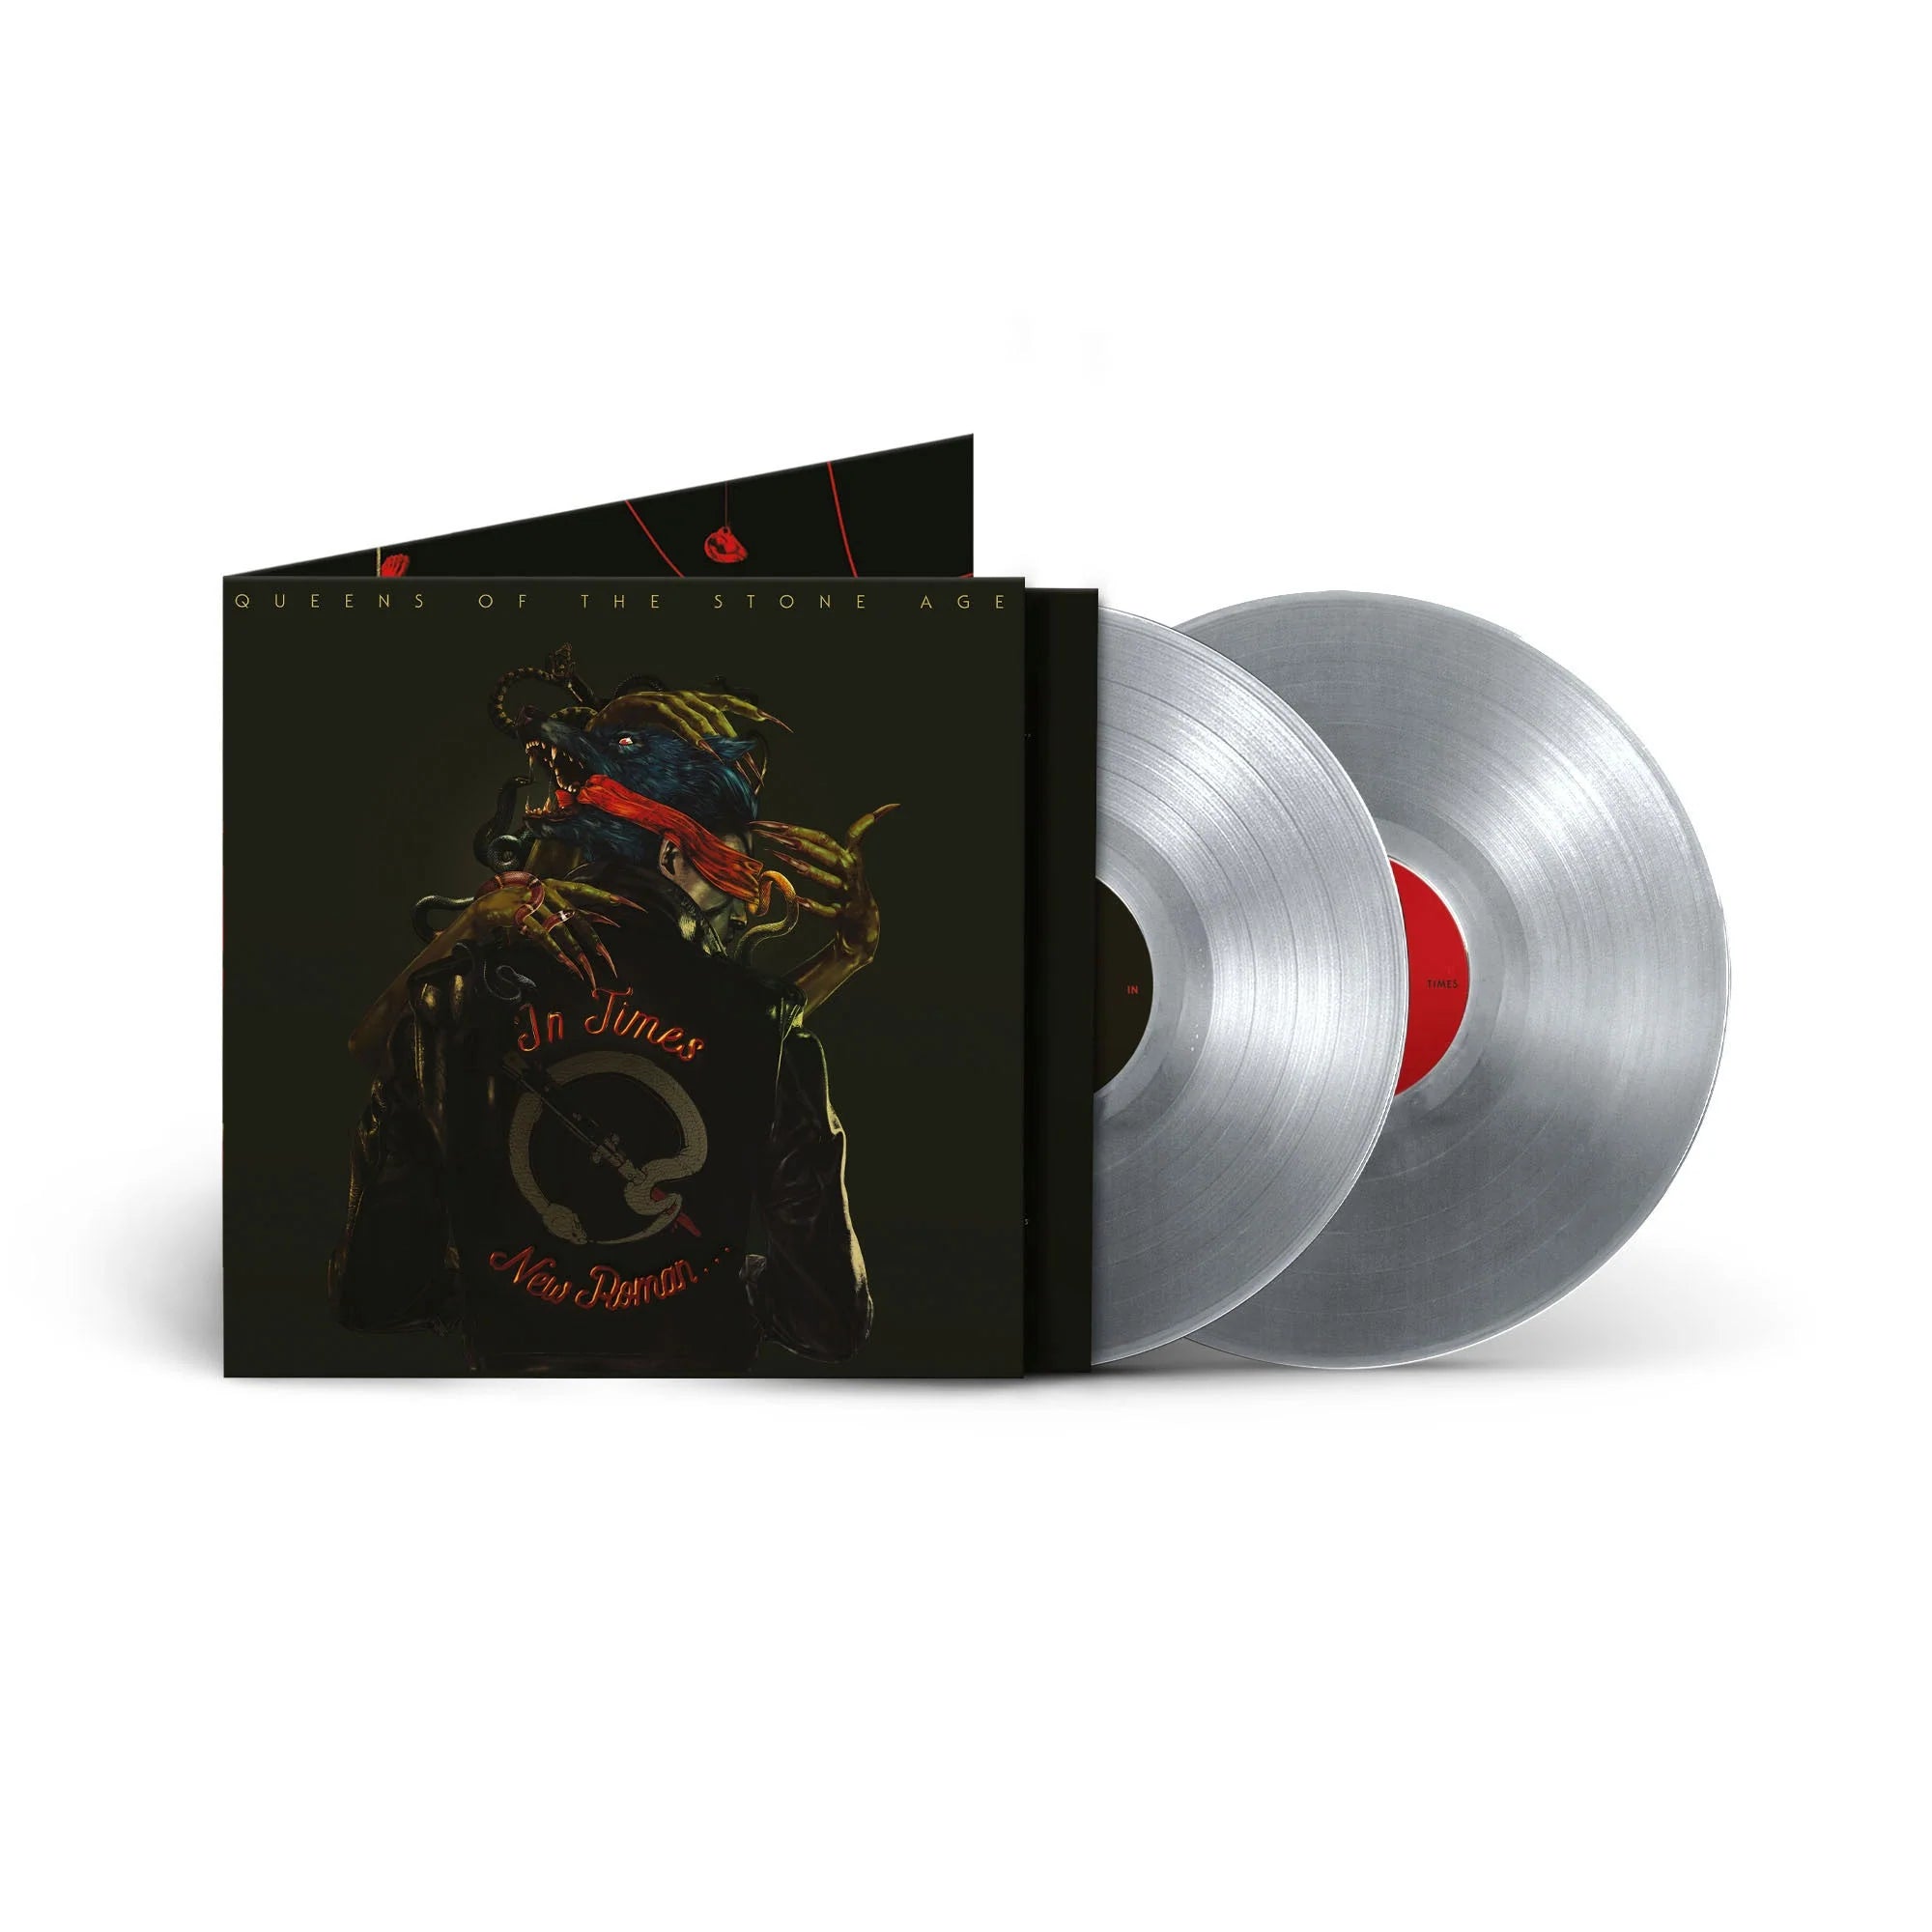 Indeholde national Nemlig Queens Of The Stone Age - In Times New Roman... (2xLP Silver Vinyl)